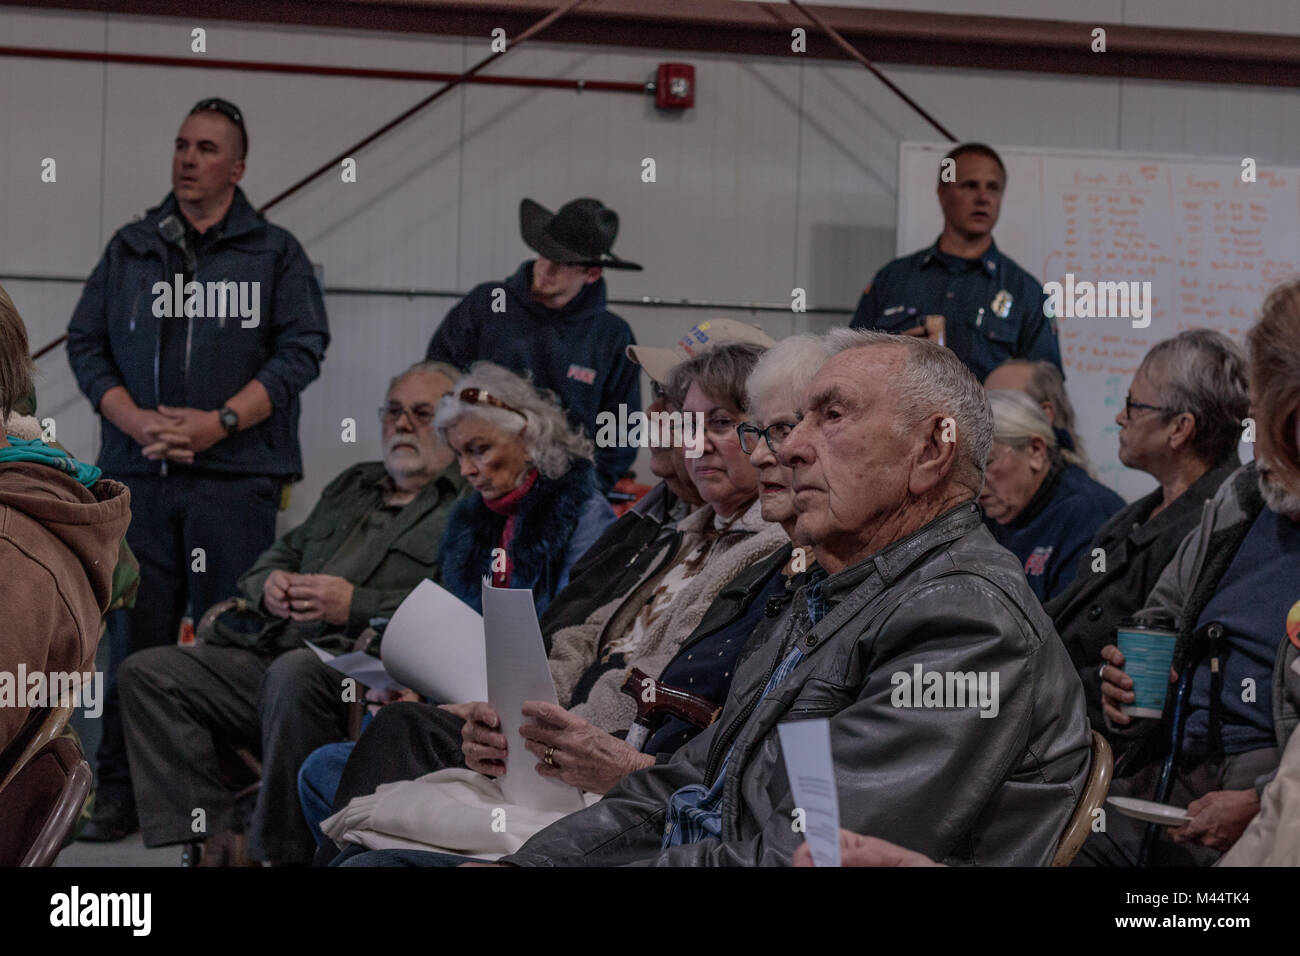 Contentious meeting on 02-13-2018 in small rural town of Julian in San Diego county, Julian Volunteer Fire Department board meeting is attended by con Stock Photo